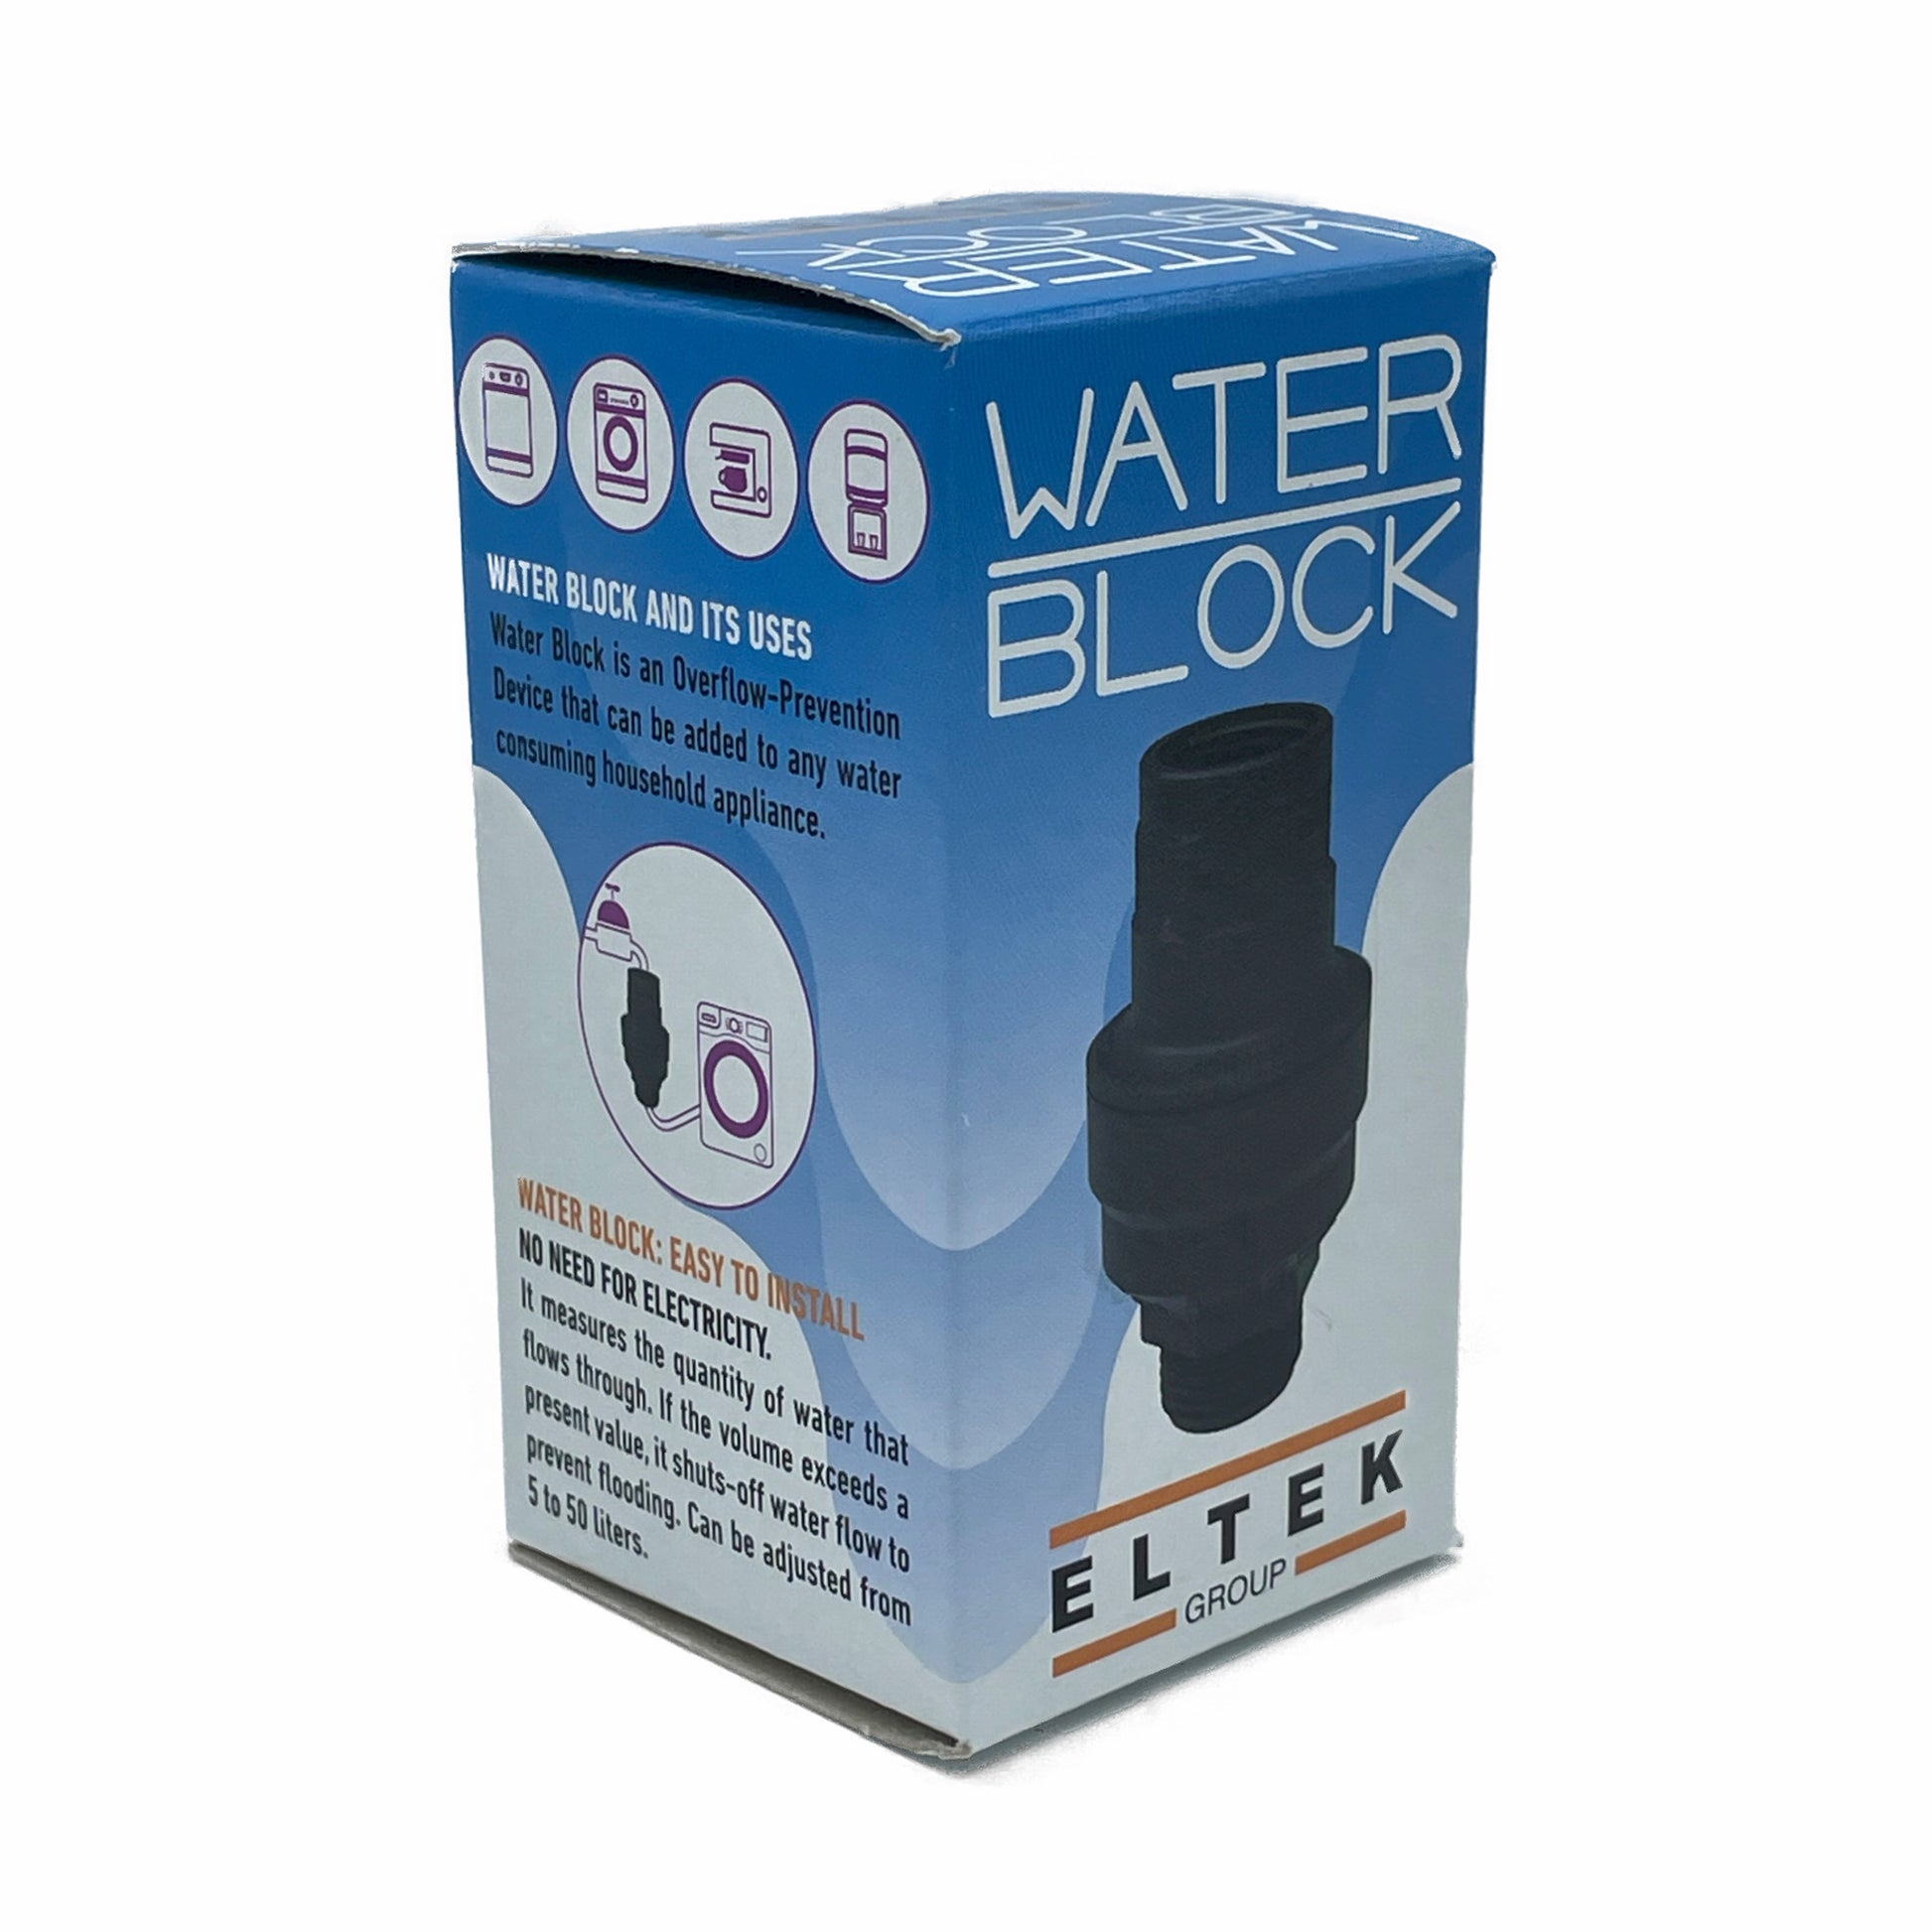 Picture of the Water Block product box. Water Block is an overflow prevention device that can be added to any water consuming household or commercial appliance. Easy to install and does not need electricity or batteries to work.